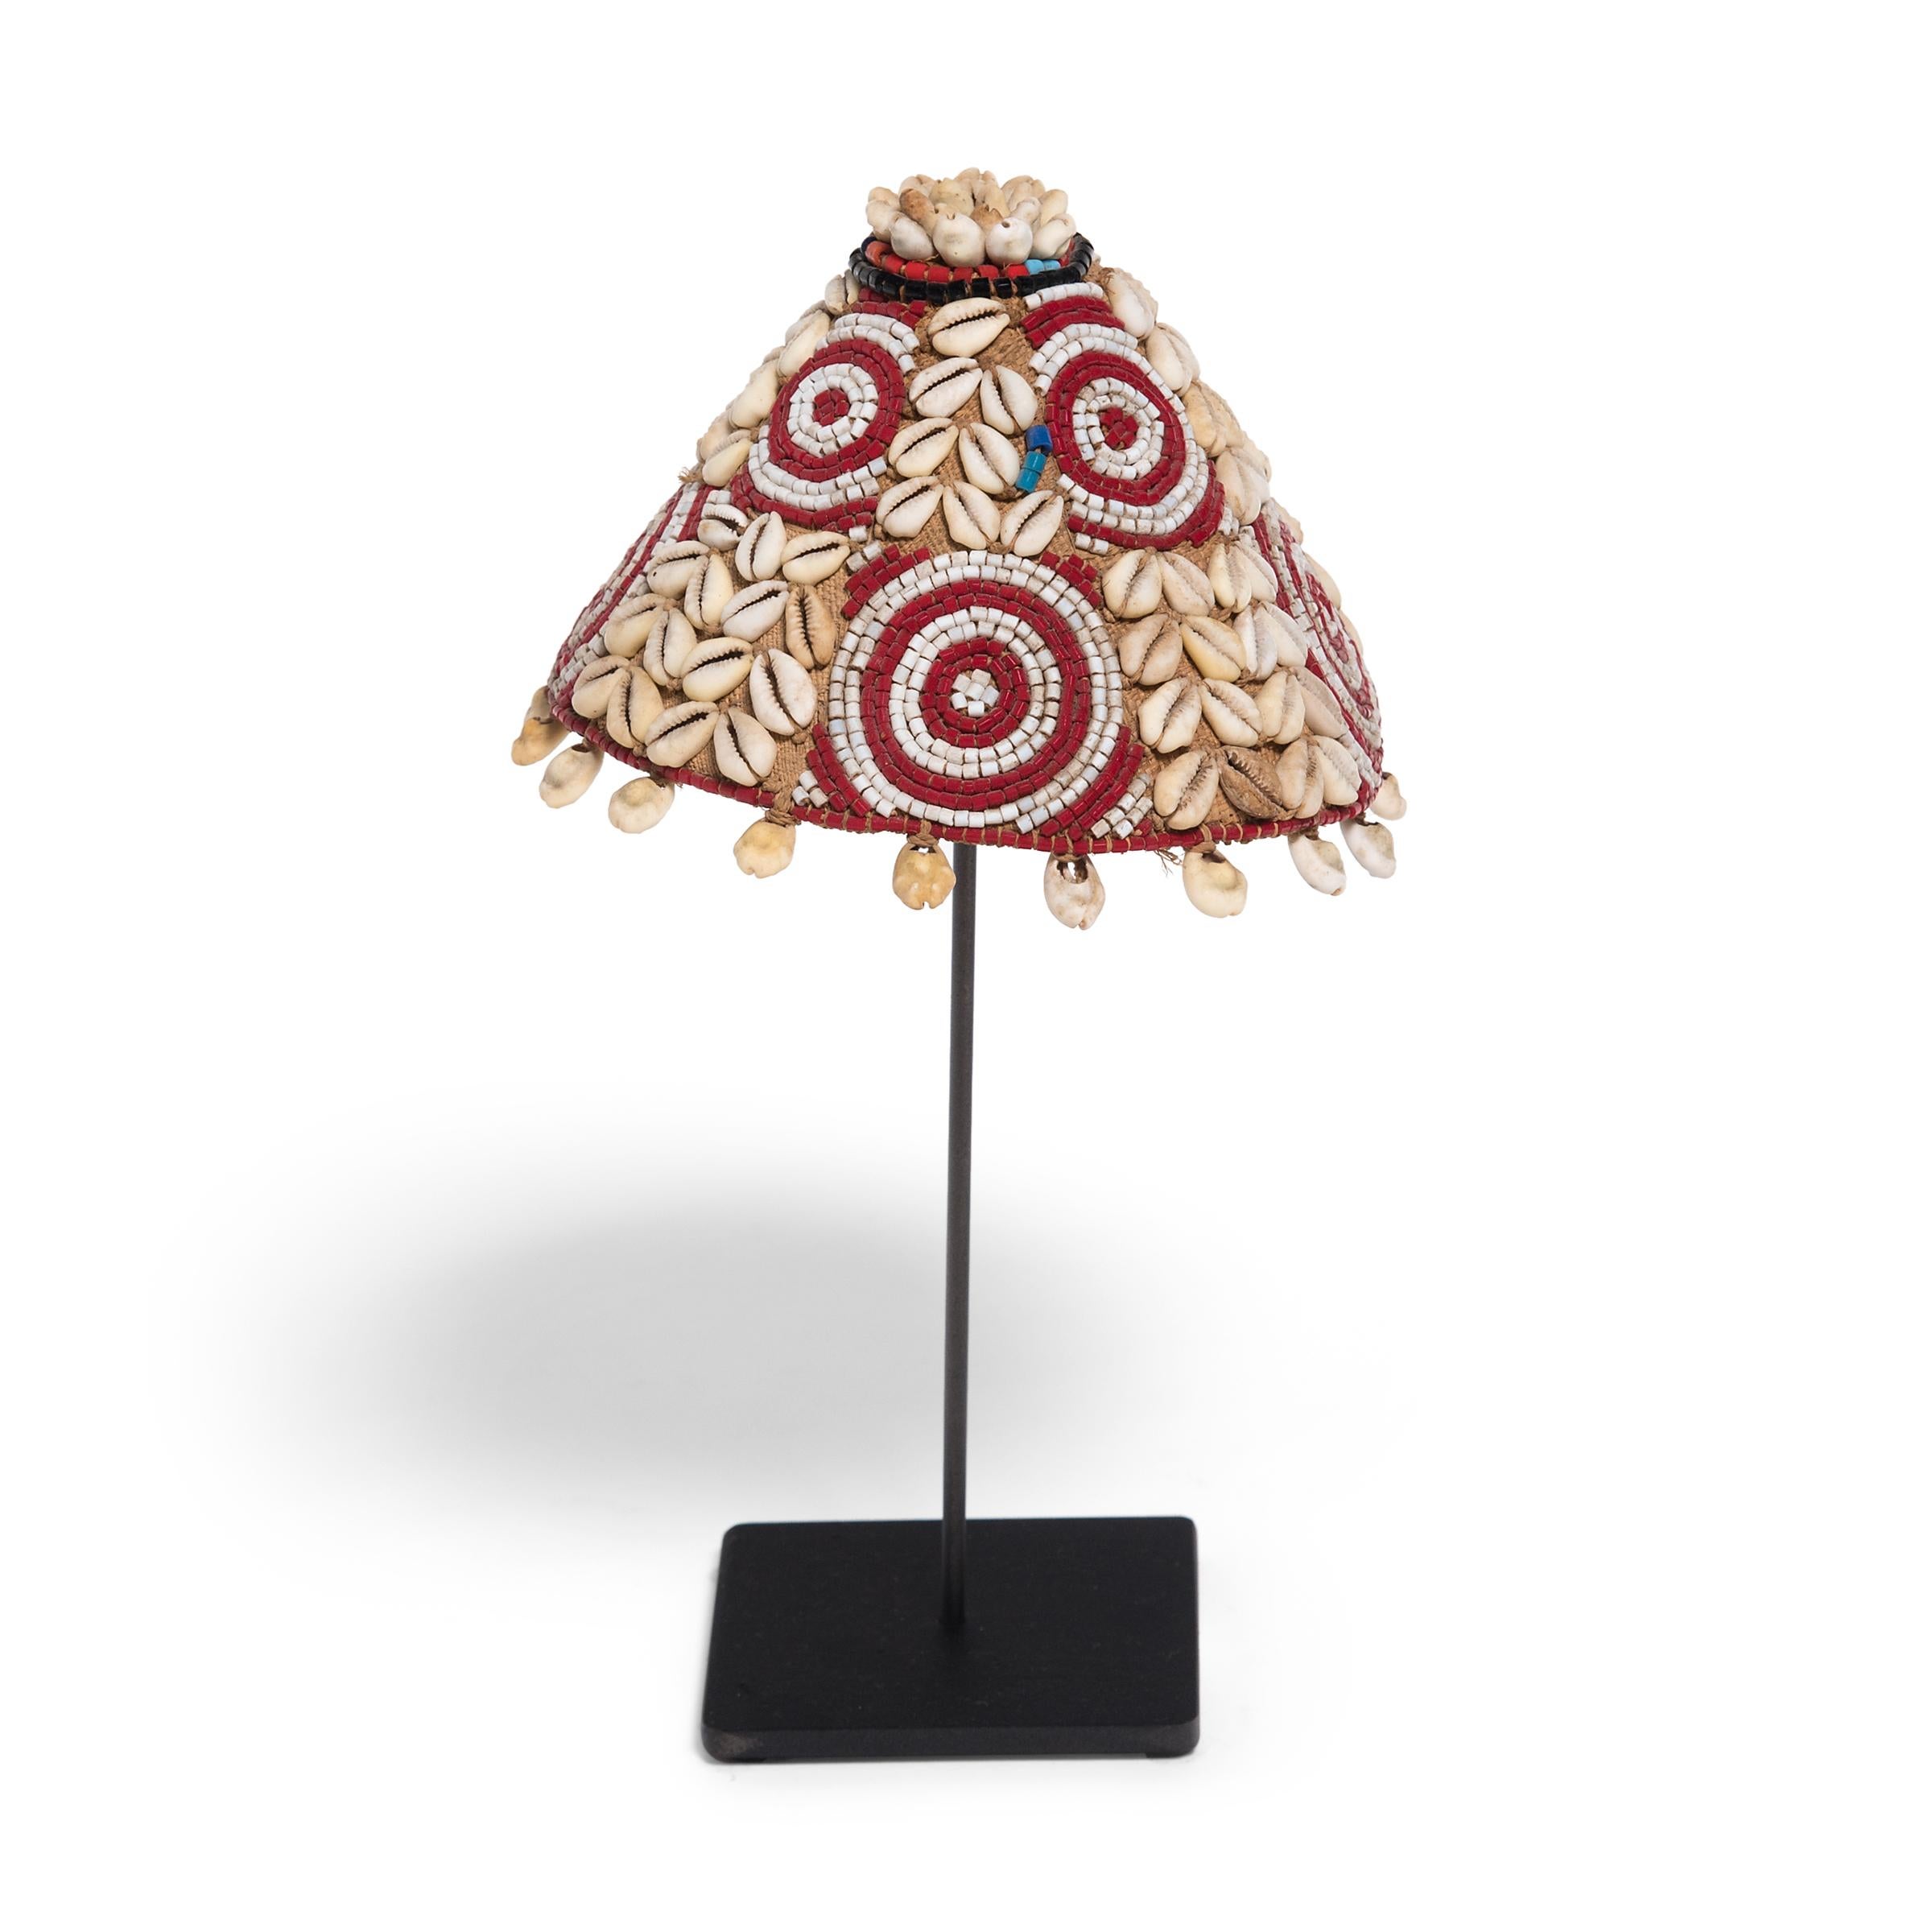 This petite cone-shaped cap, known as laket, was created by an artisan of the Kuba peoples of the Democratic Republic of the Congo. The base is made of a simple woven raffia fabric, which was then embellished with a pattern of cowrie shells and